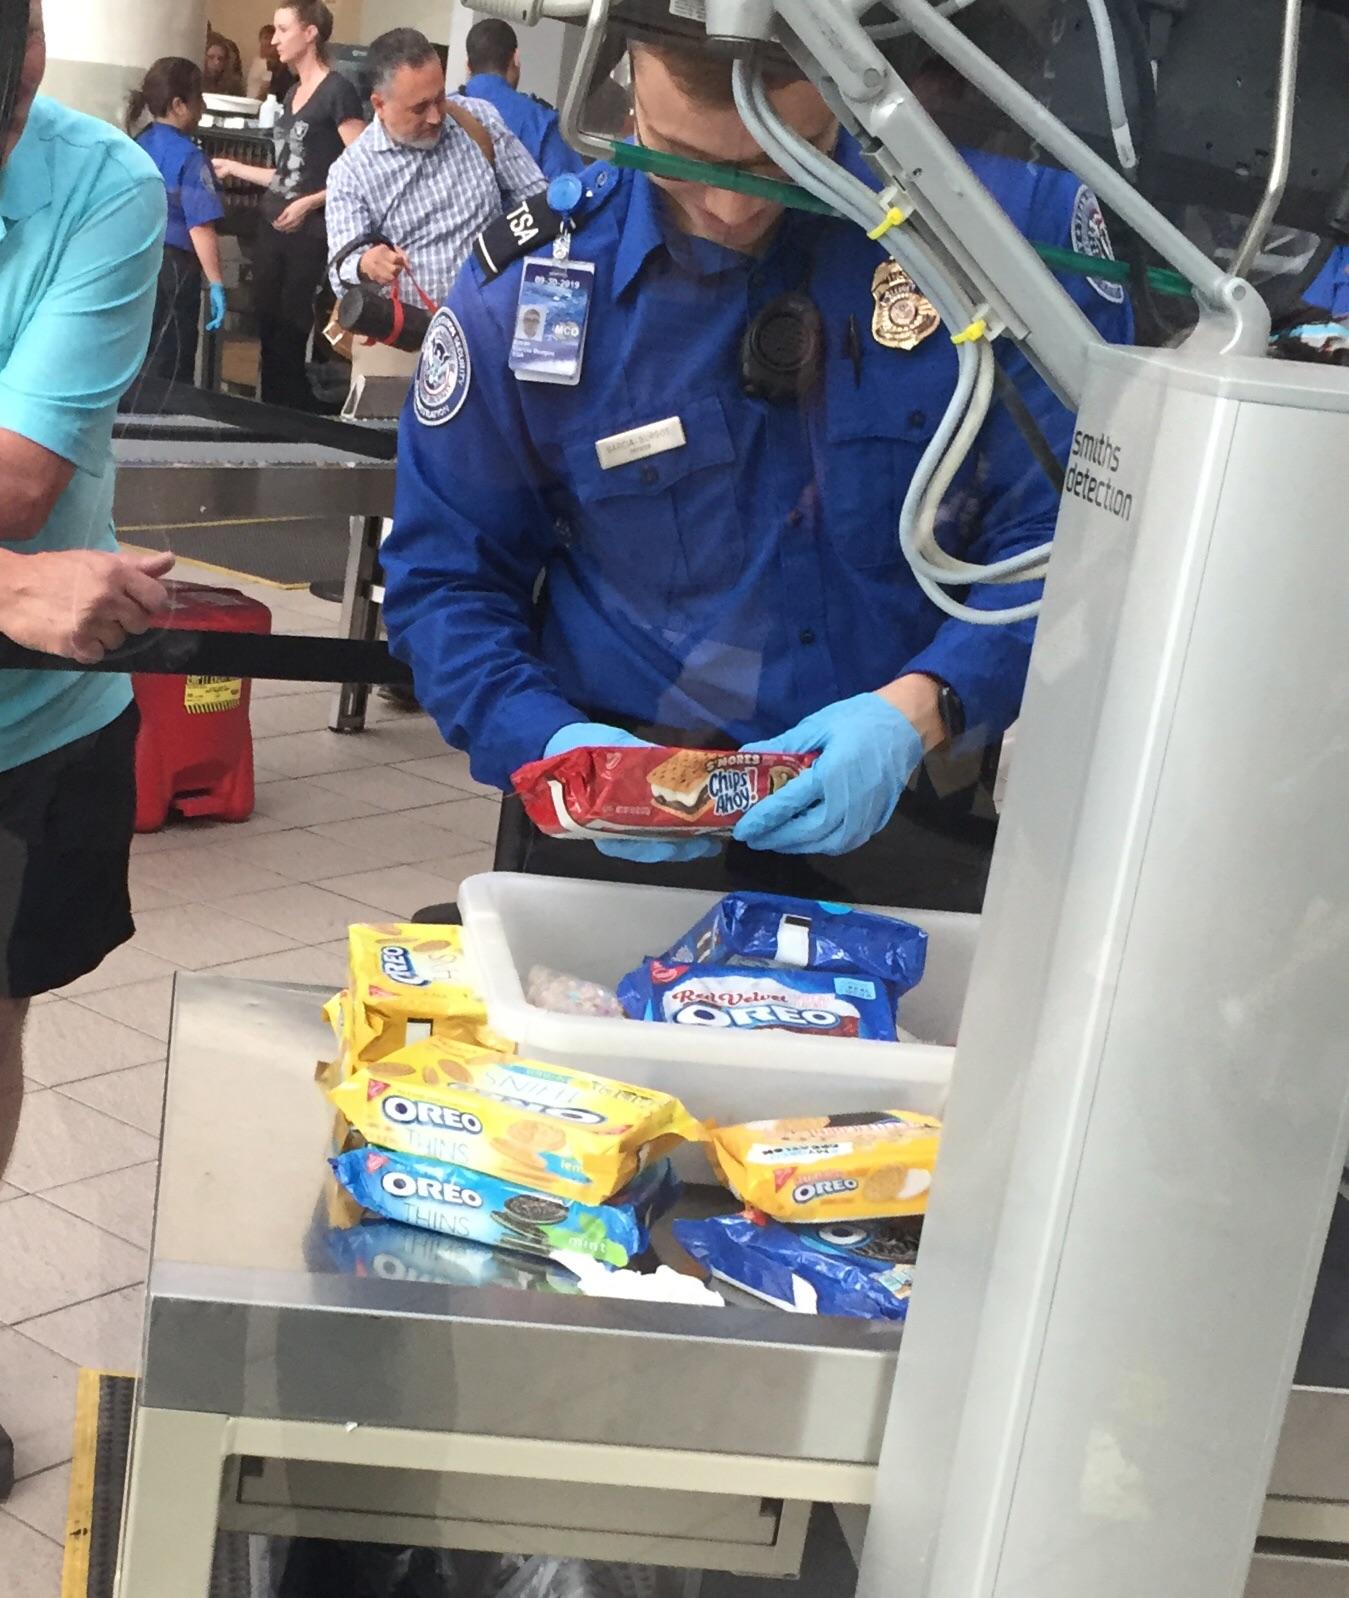 That time I saw someone try to smuggle 50 boxes of cookies out of the Orlando Airport and was treated like a drug lord.